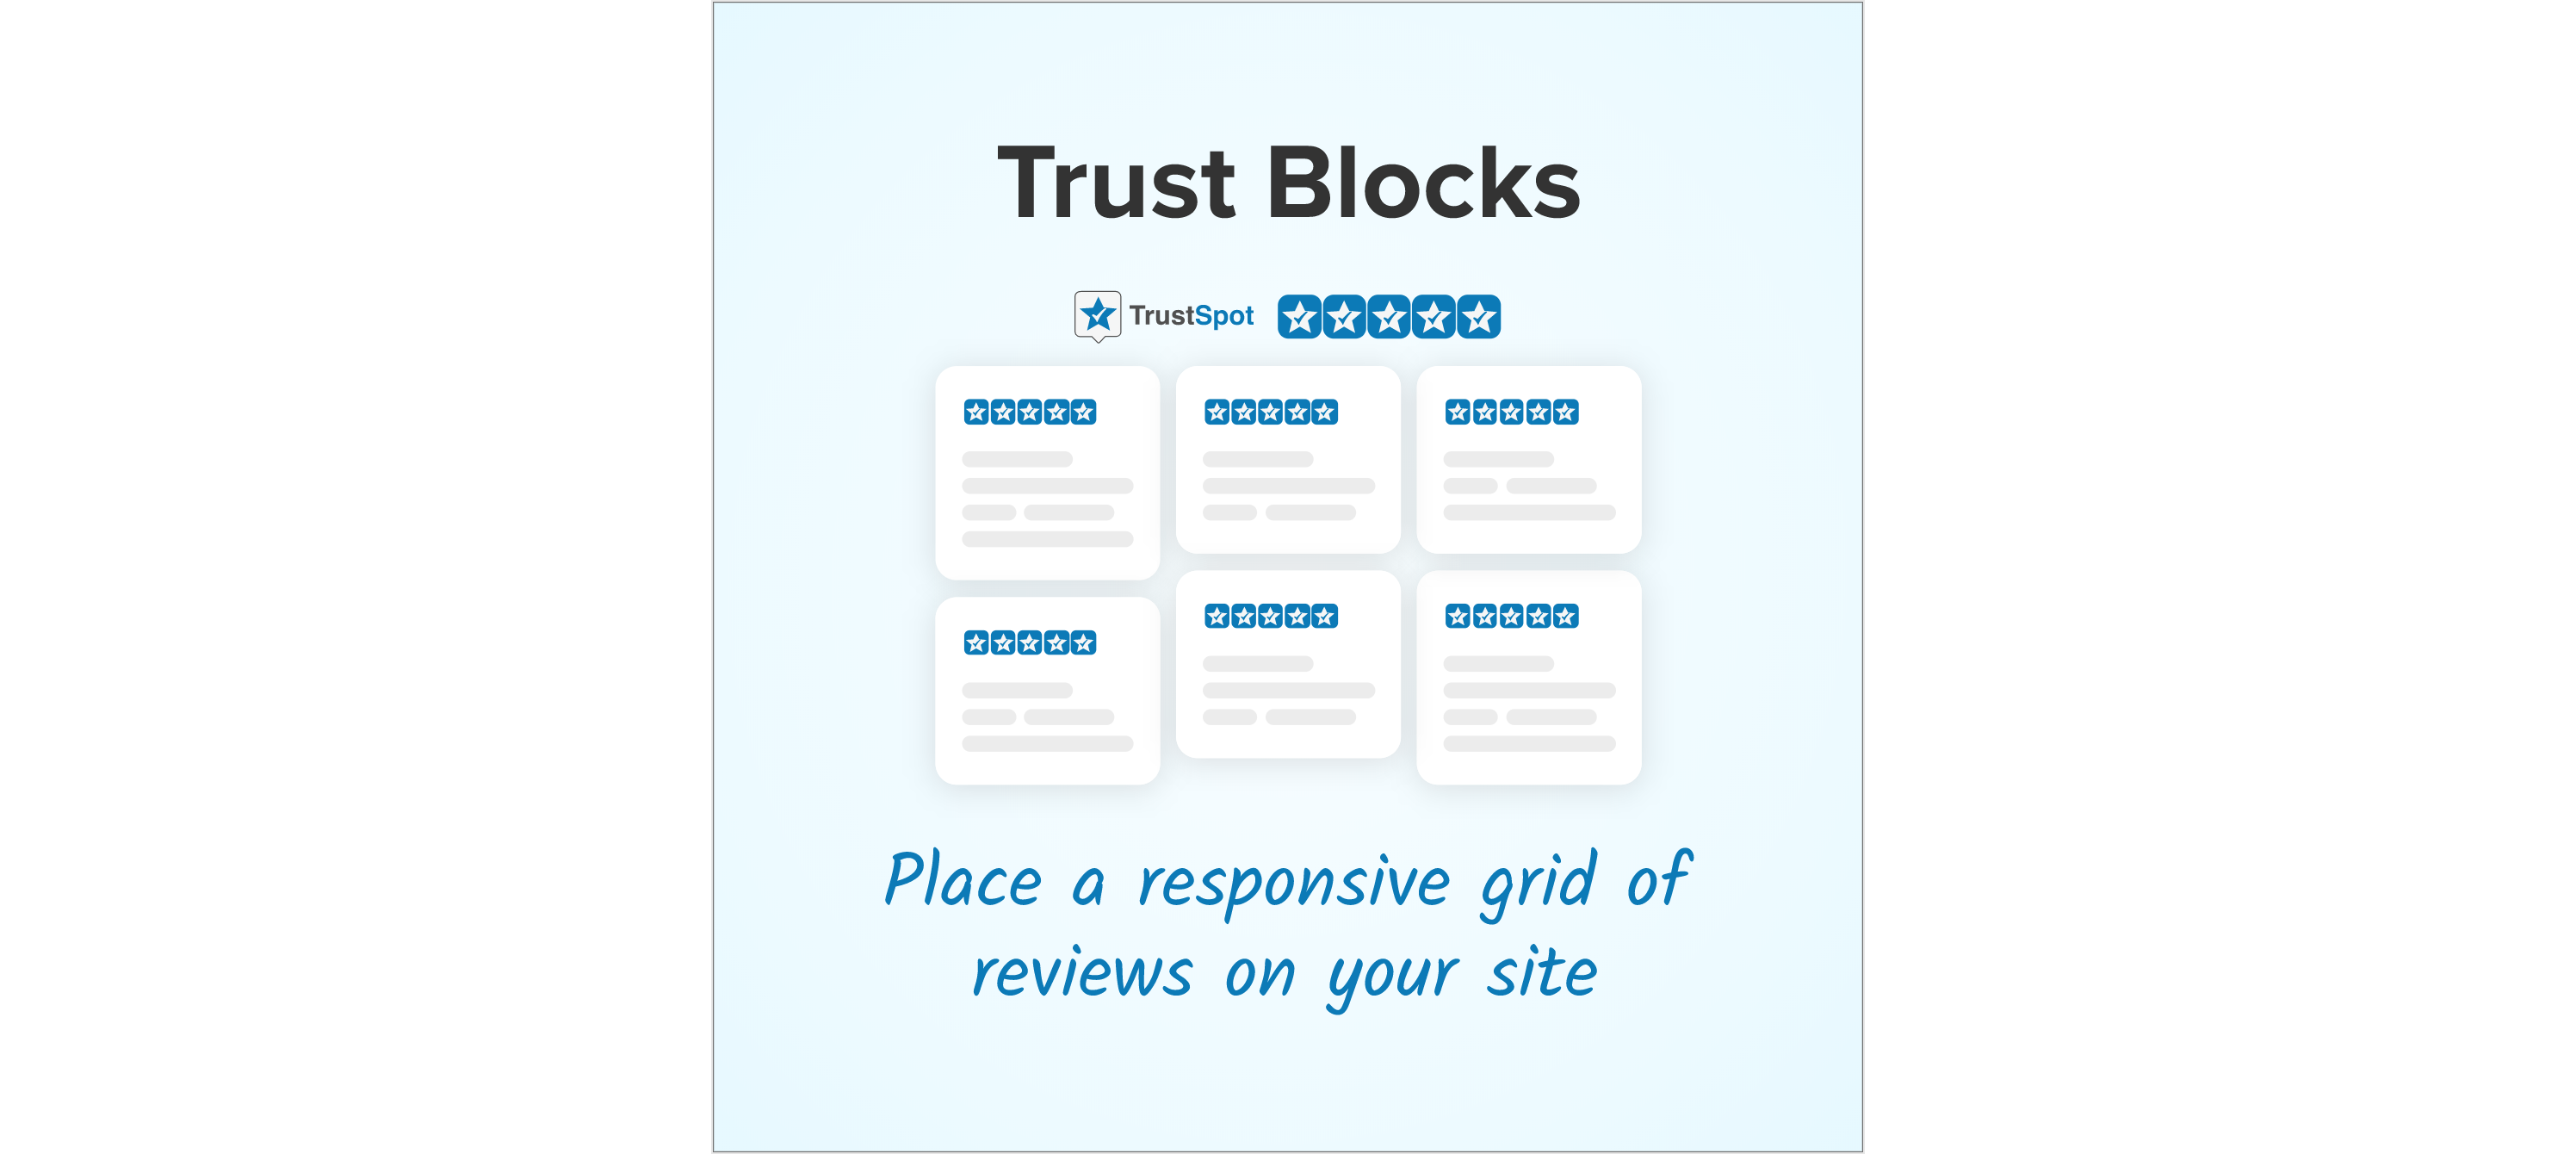 Place a responsive grid of reviews on your site.